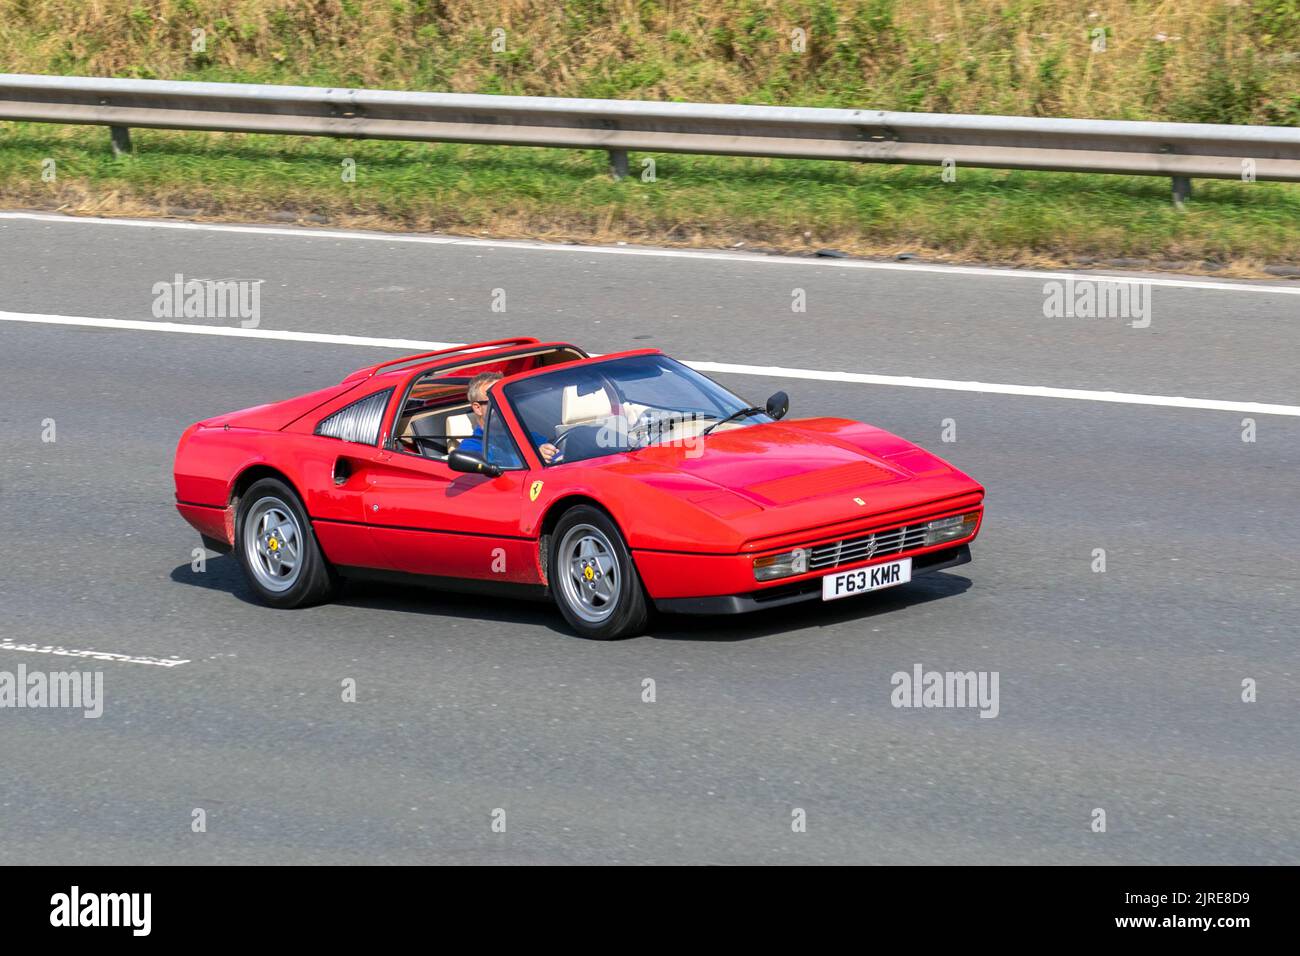 1989, 80s, eighties Red, Rosso Corsa FERRARI 328, mid-engine V8, two-seater wedge profile sports cars 3185cc petrol Italian, Targa roadster; moving, being driven, in motion, travelling on the M6 motorway, UK Stock Photo